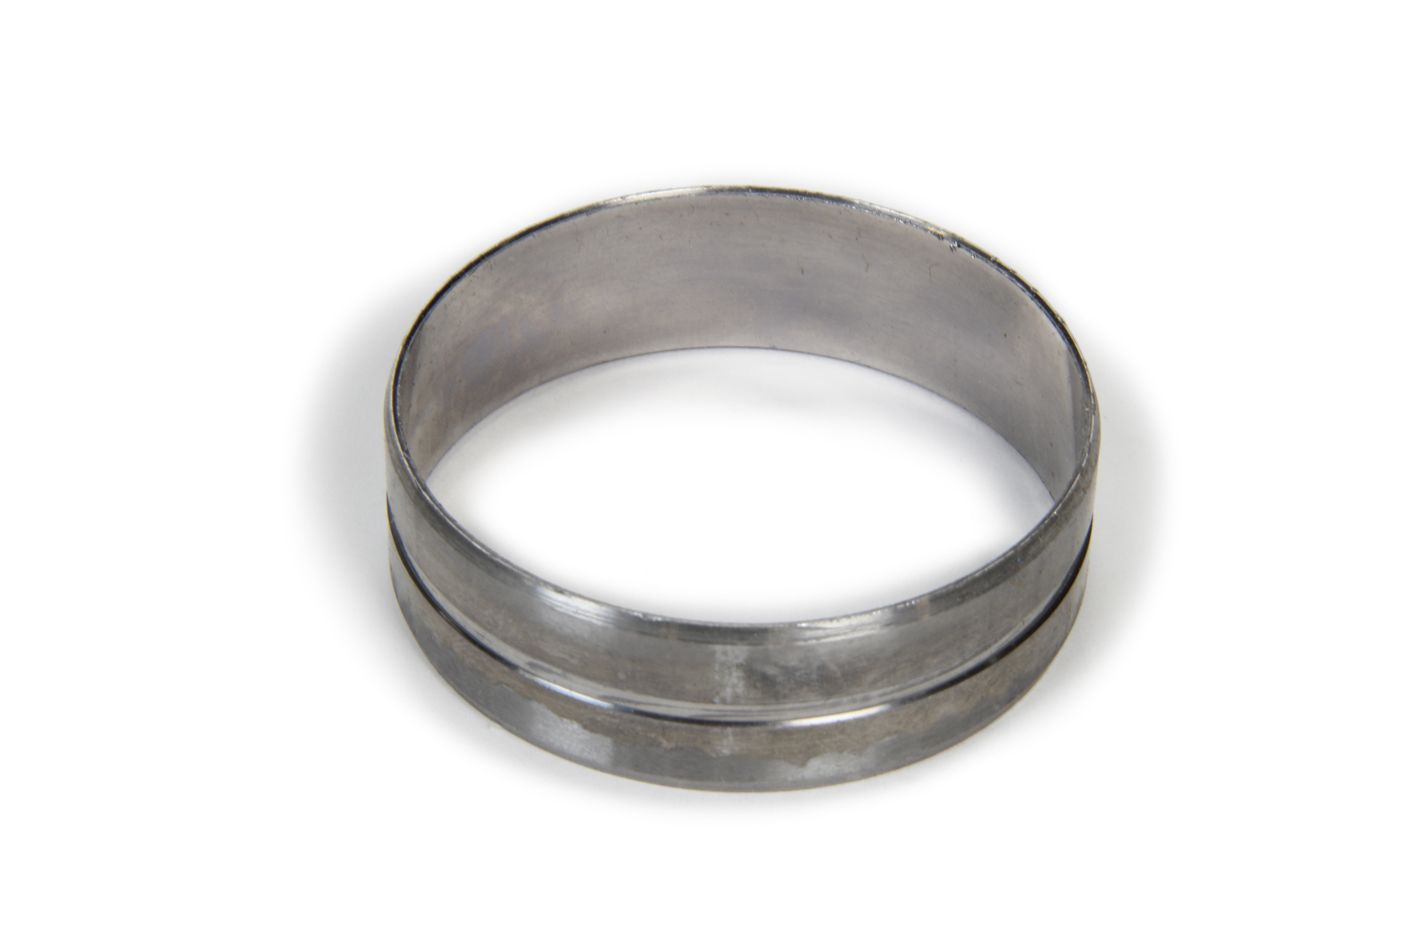 60mm Cam Bearing (1pk) OD Grooved w/No Oil Hole